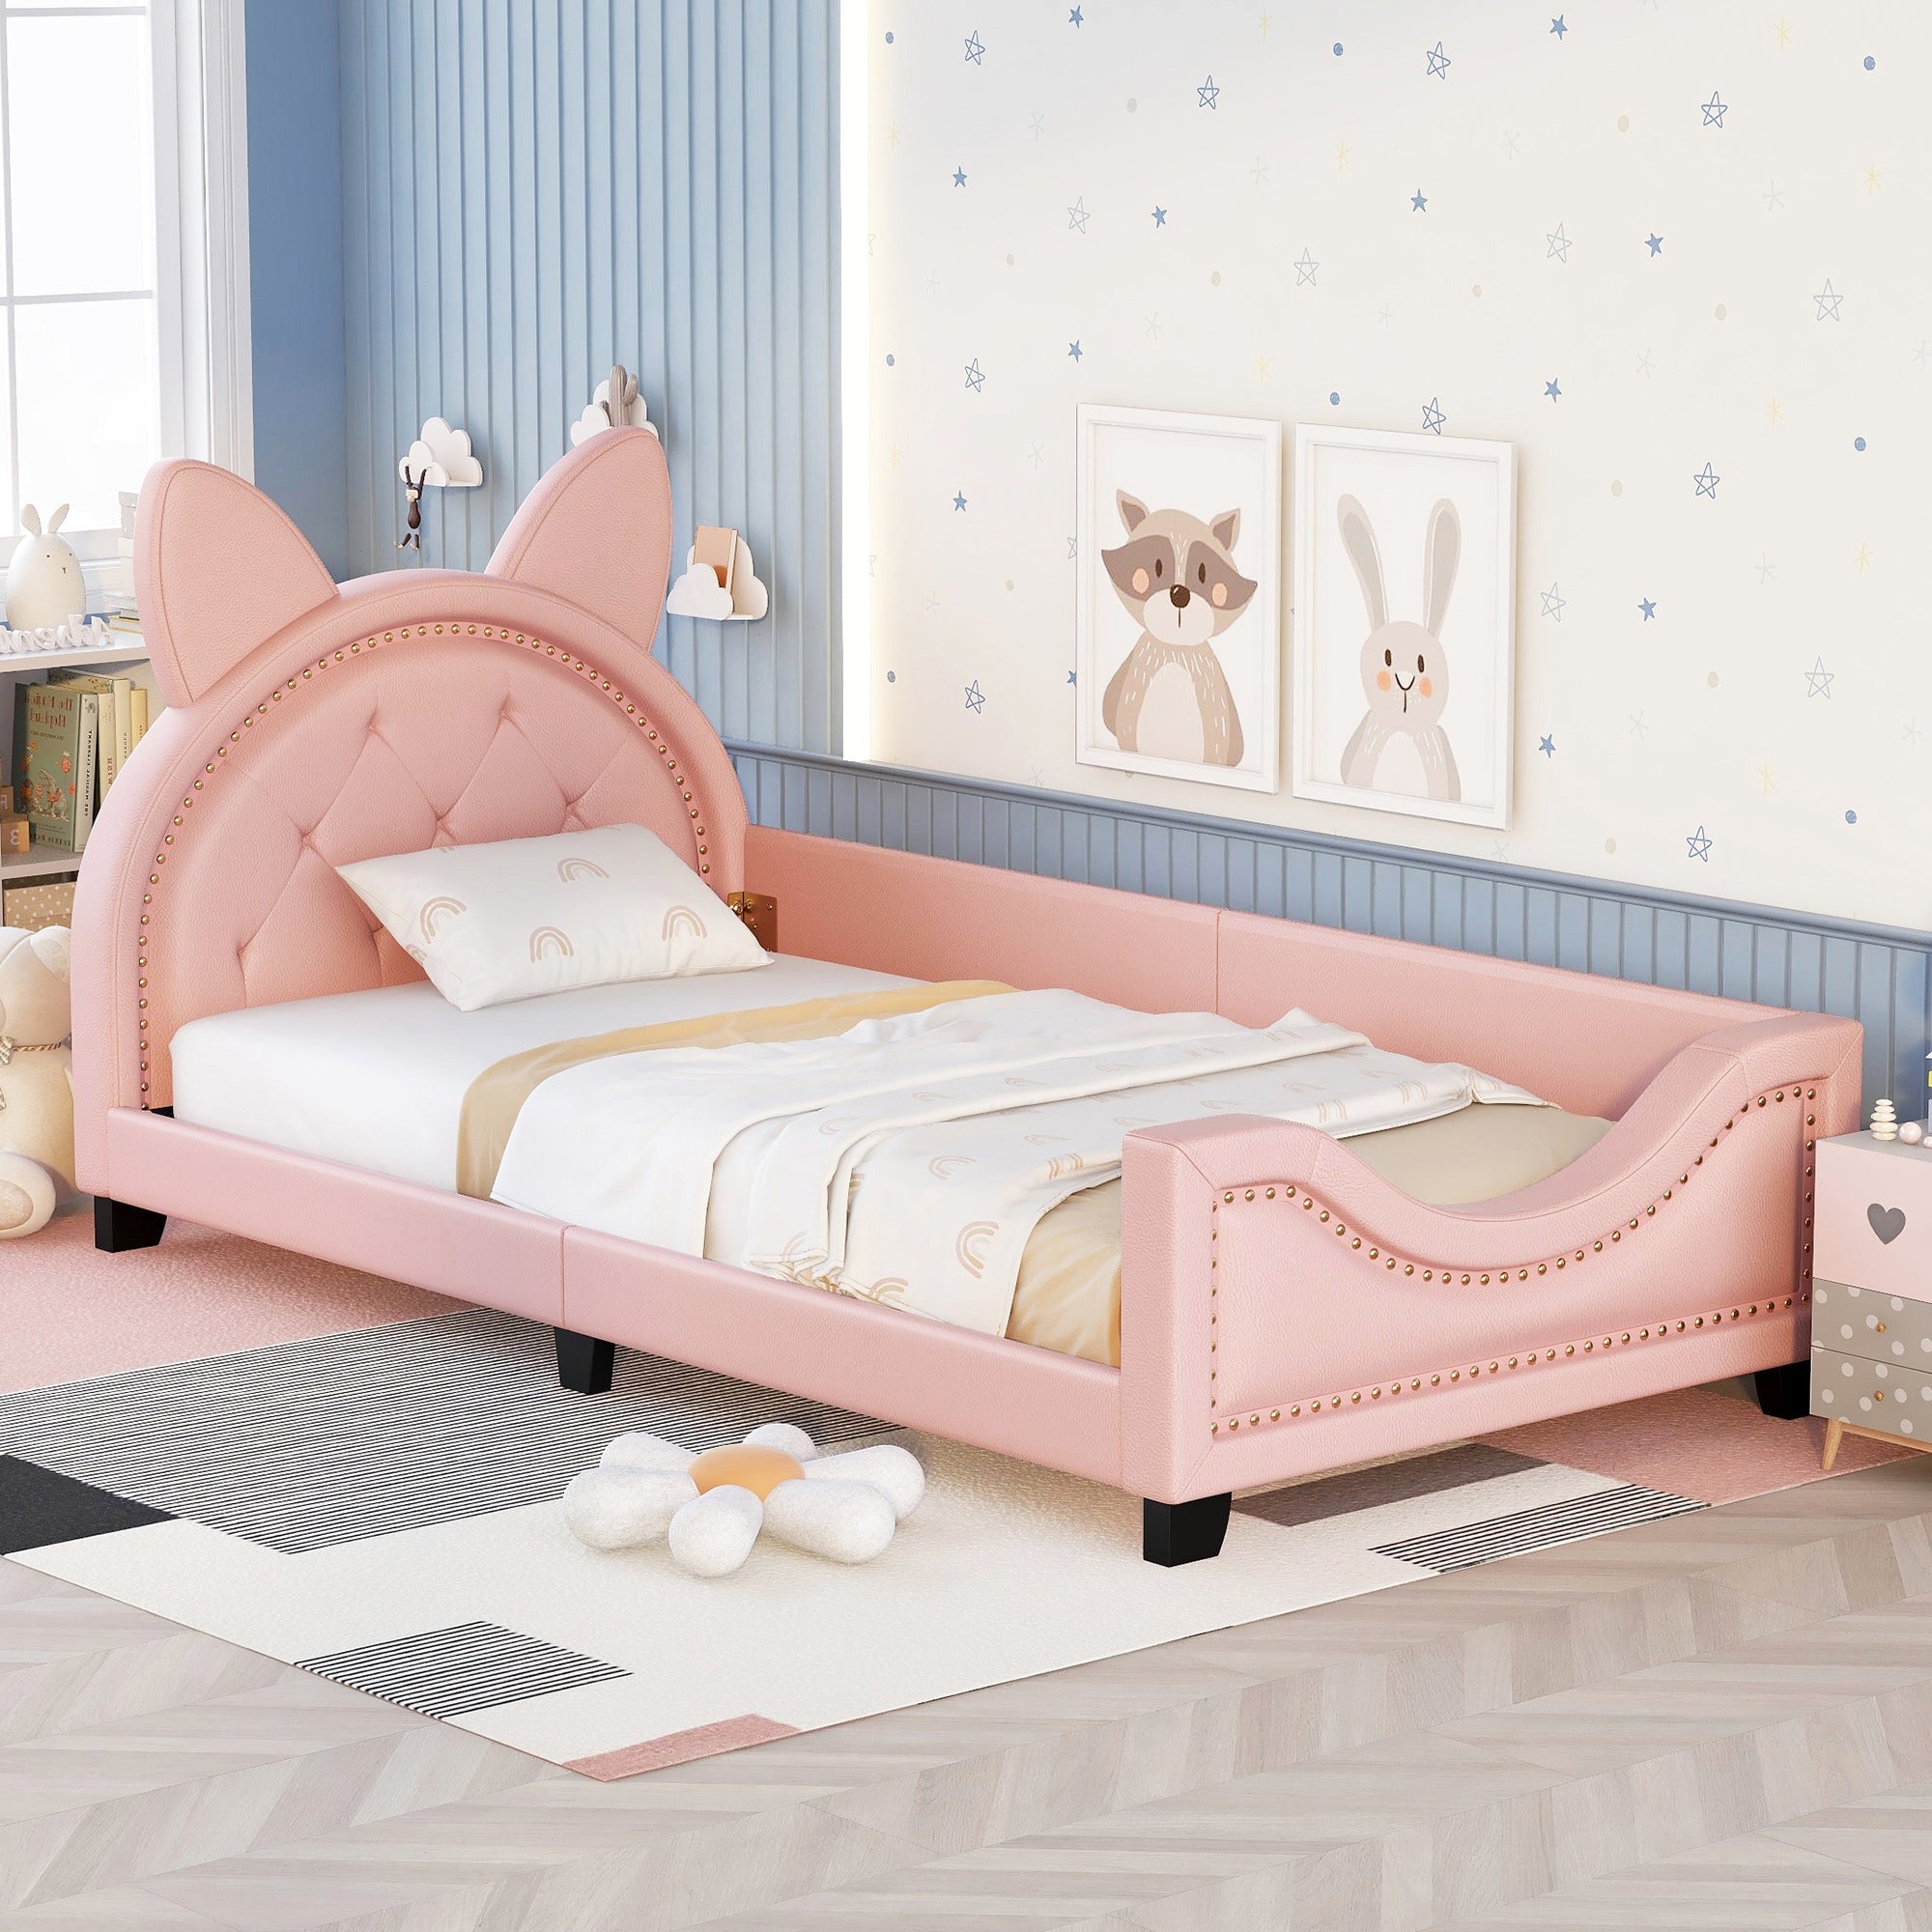 Twin Size Upholstered Daybed with Carton Ears Shaped Headboard | Pink | Stylish & Functional